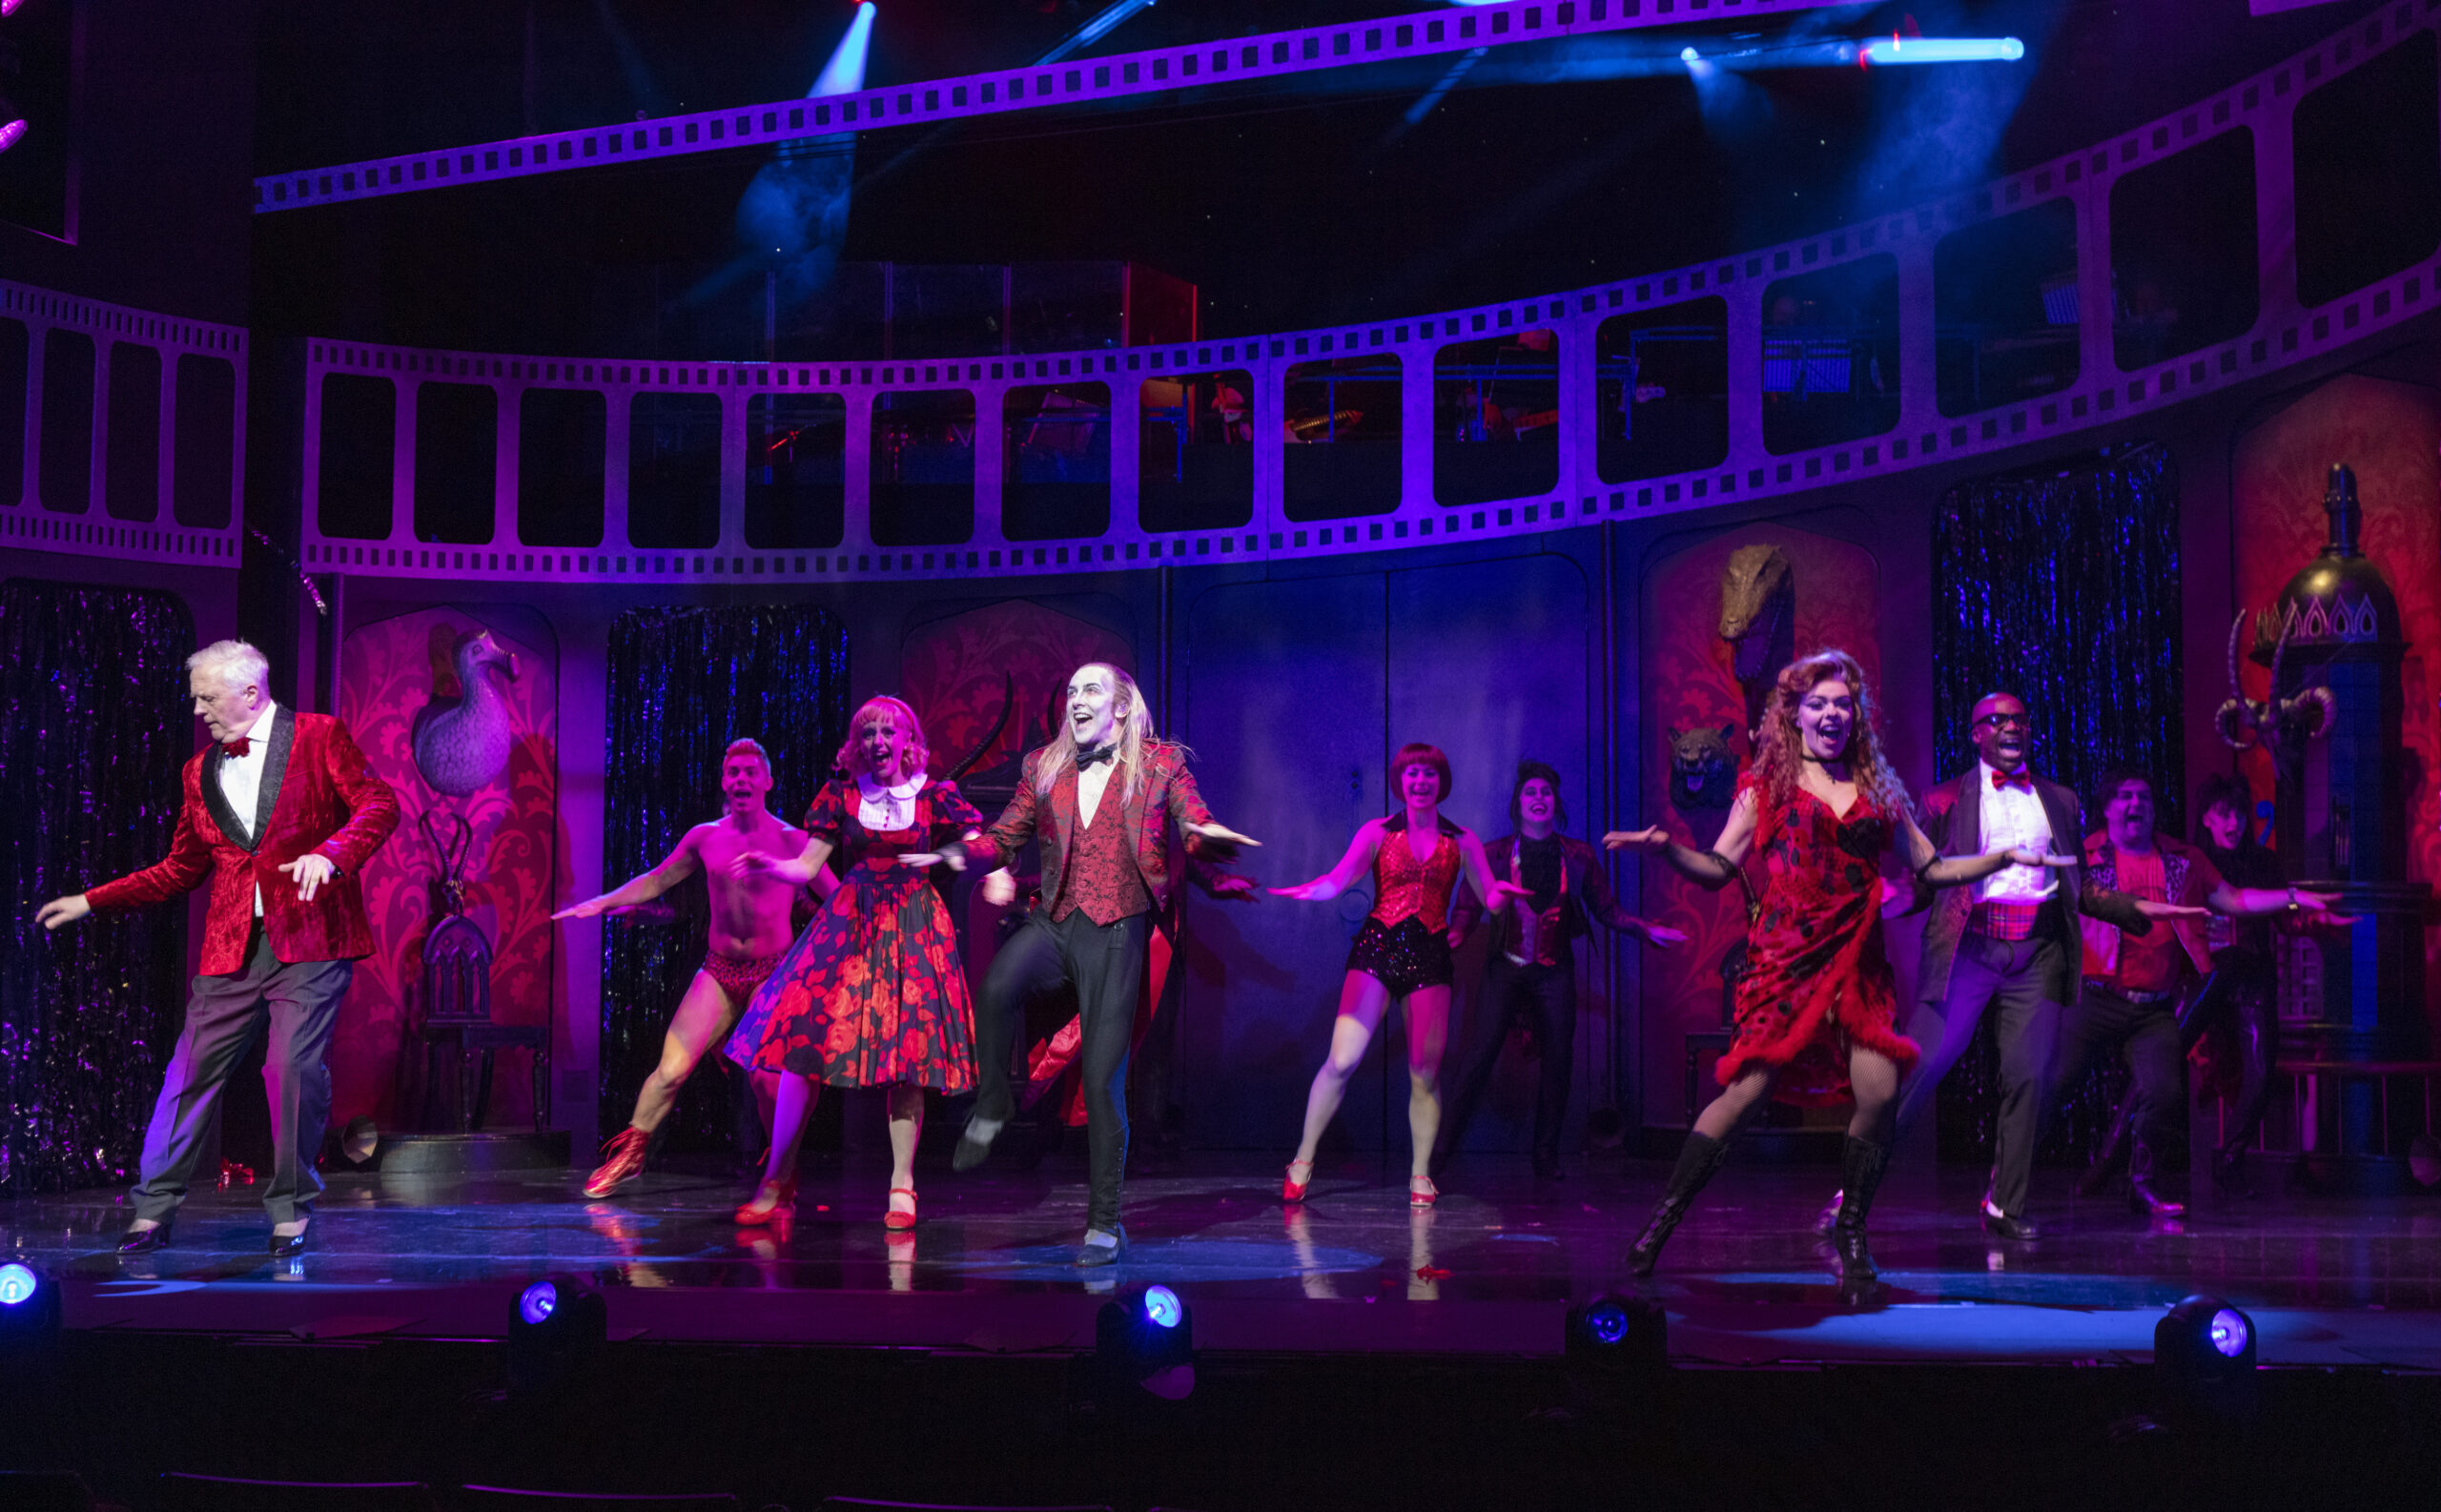 The Rocky Horror Picture Show - The Grand Opera House